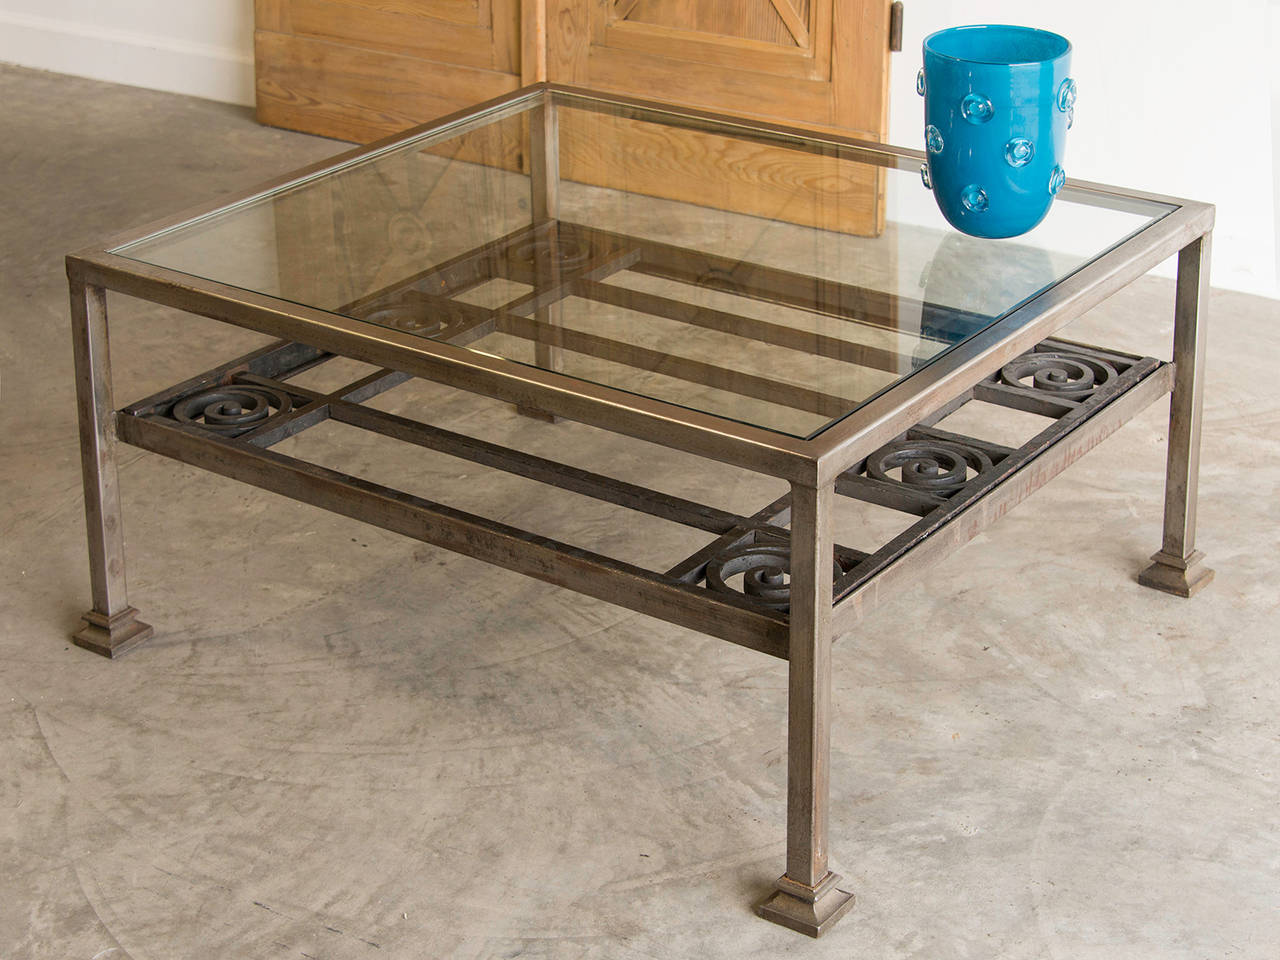 Art Deco Period Forged Iron Grate, France c.1930, Custom Mounted as a Coffee Table. The bold design of this iron grate identifies it as being forged during the Art Deco period where it was originally used as window grille installed for security that